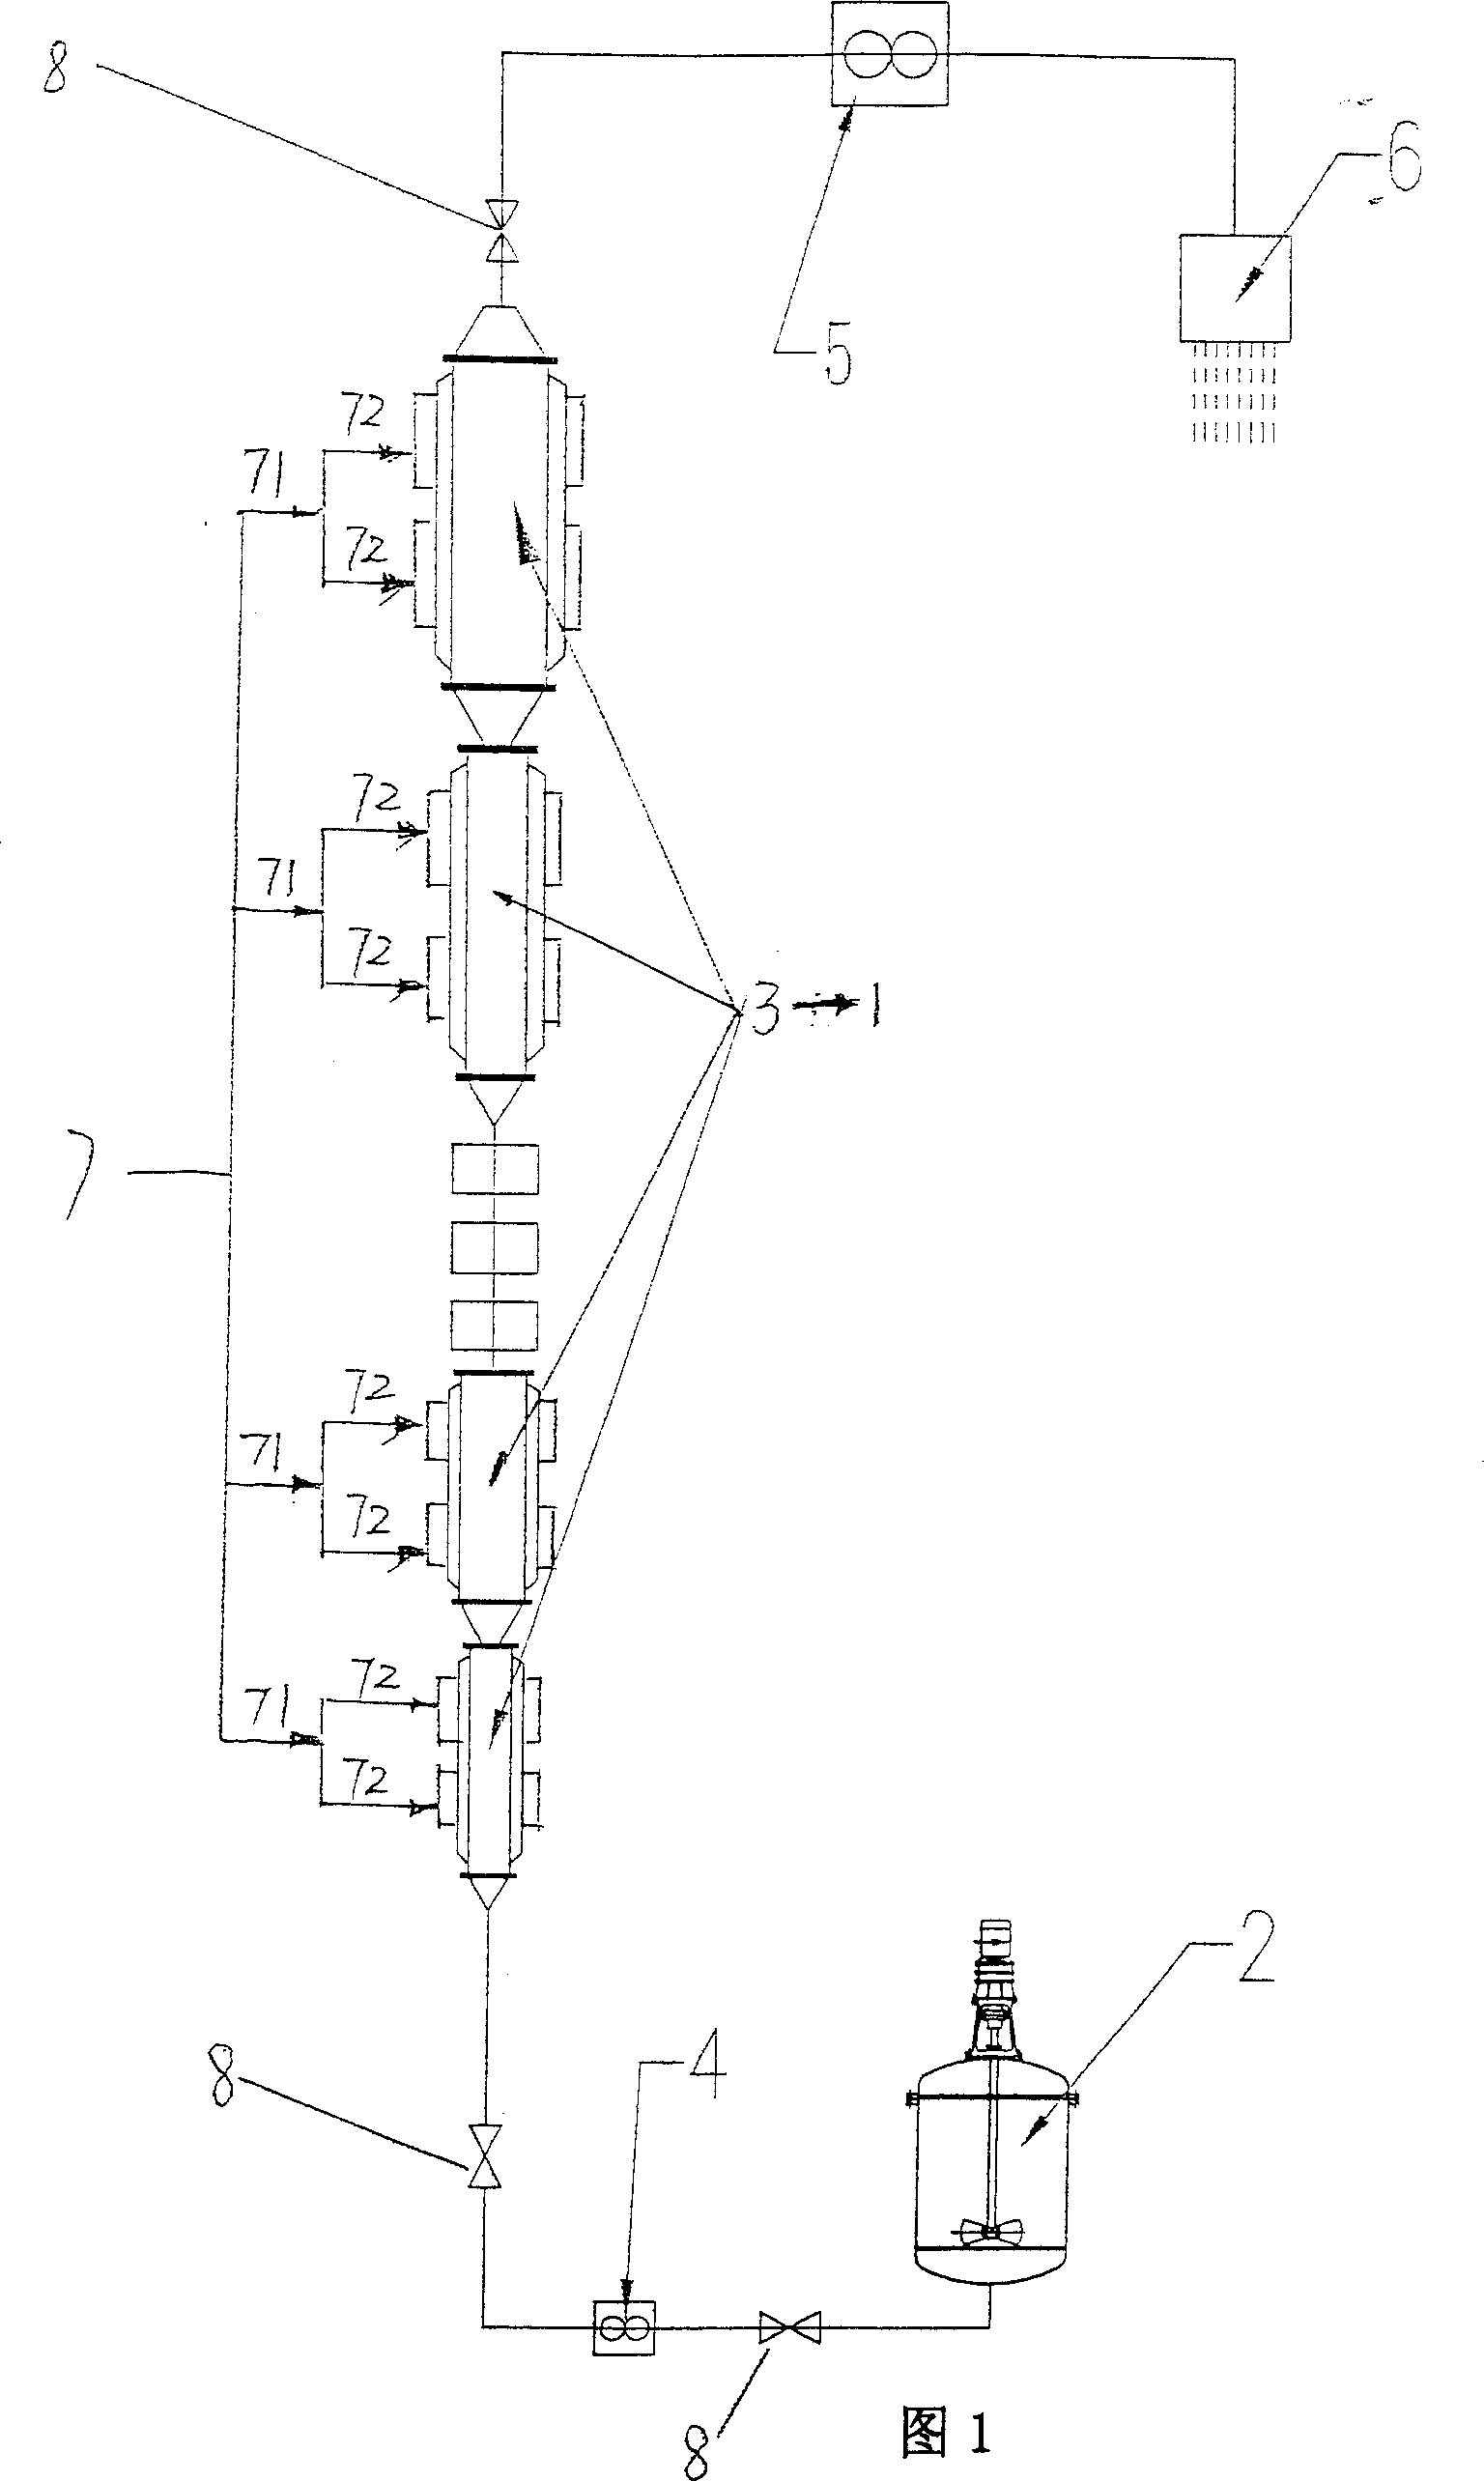 Lactide analog monomer continuous polymerization device and process